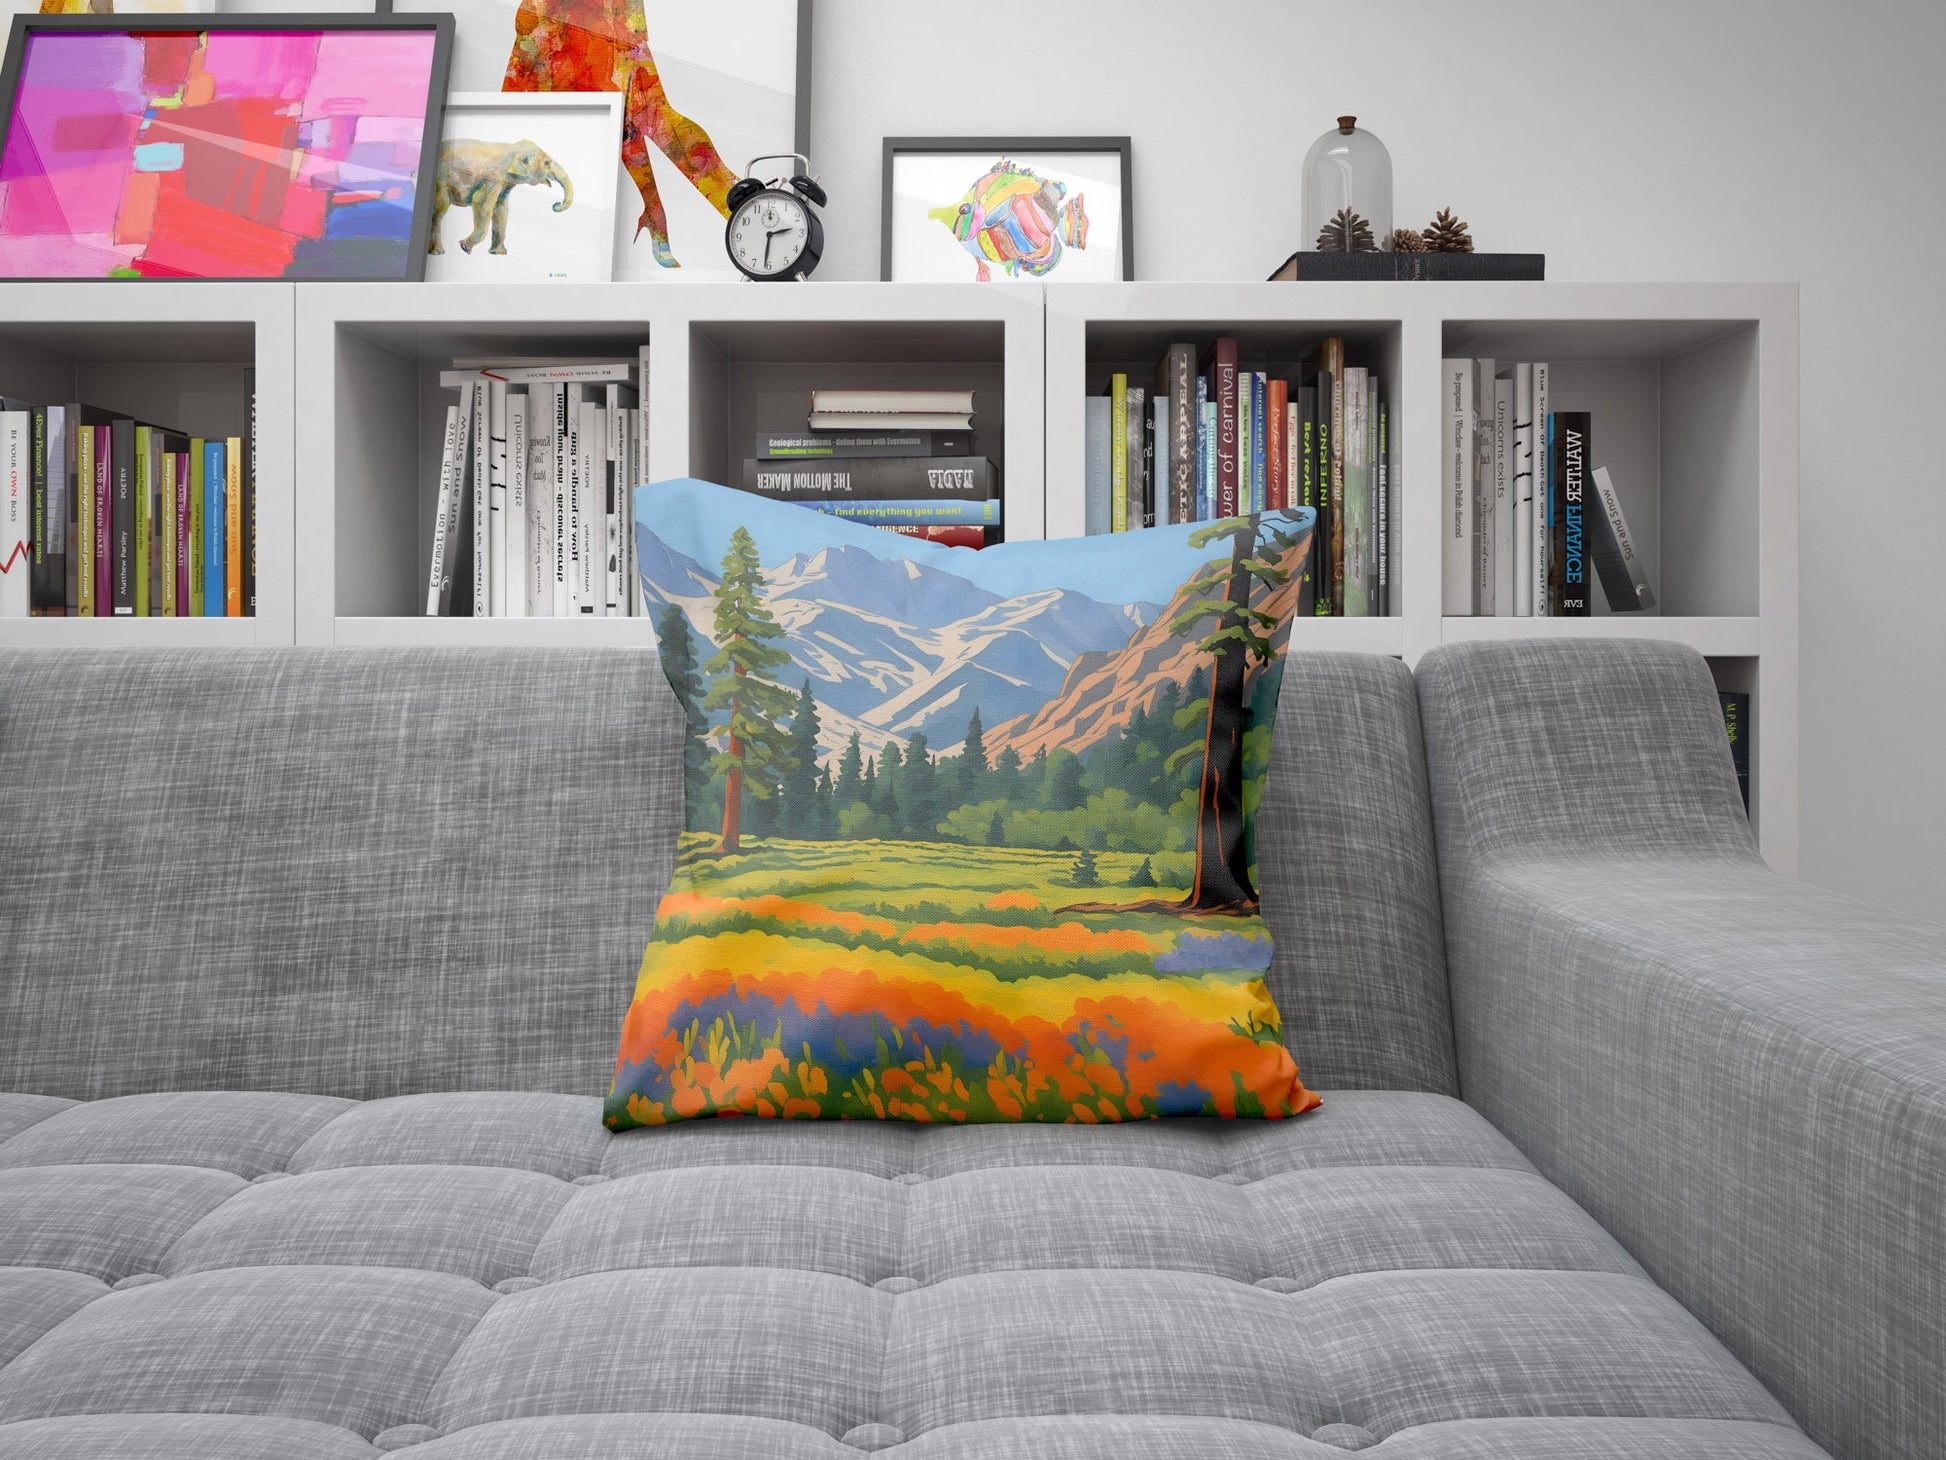 Zumwalt Meadow In Sequoia And Kings Canyon National Parks California Decorative Pillow, Usa Travel Pillow, Comfortable, Colorful Pillow Case